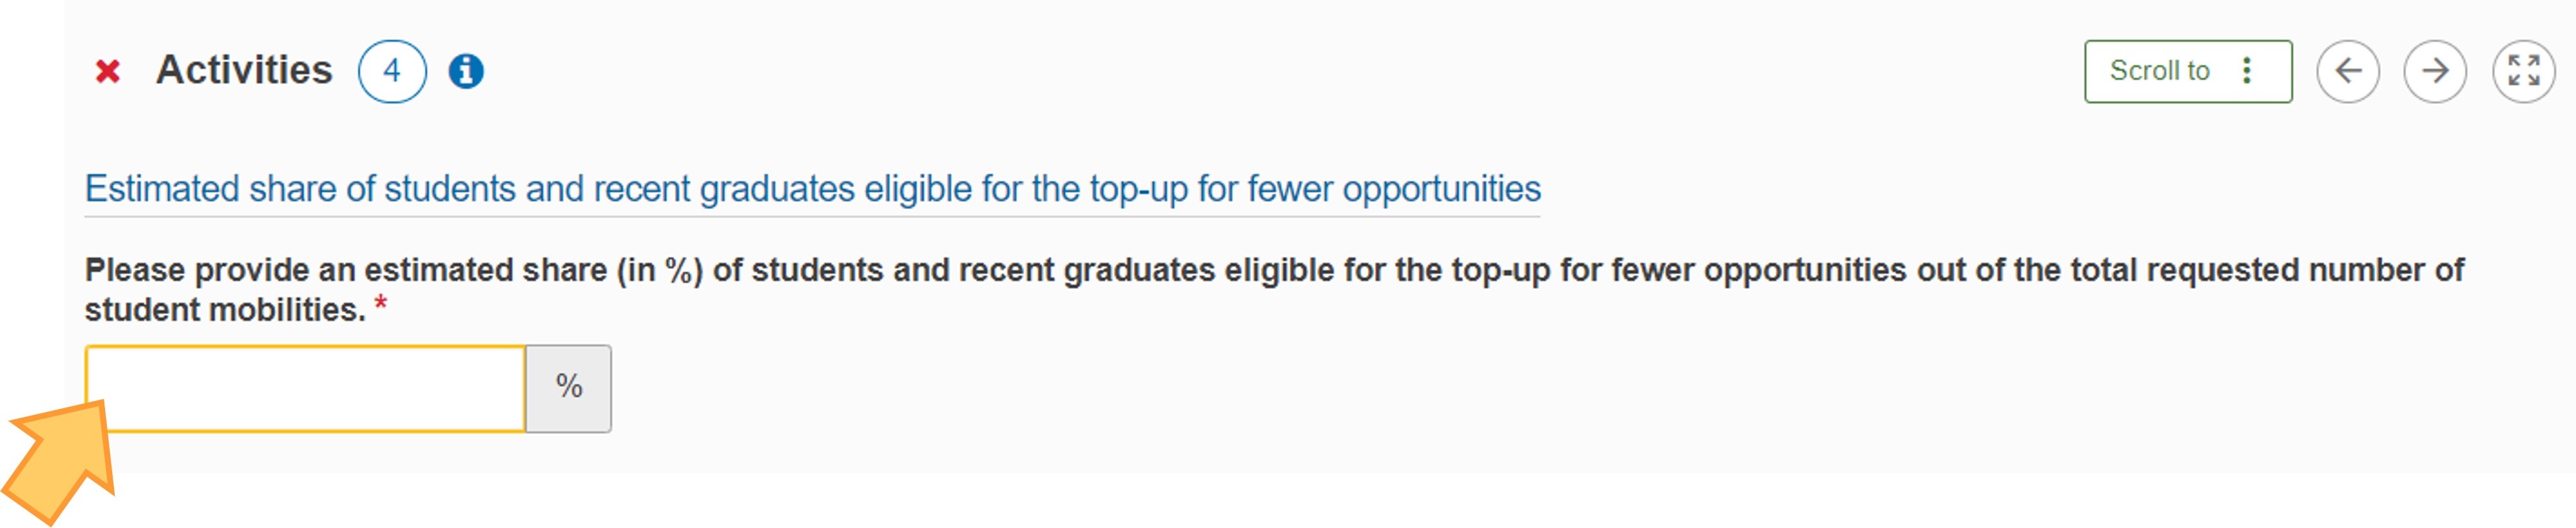 Provide the Estimated share of students and recent graduates eligible for the top-up for fewer opportunities